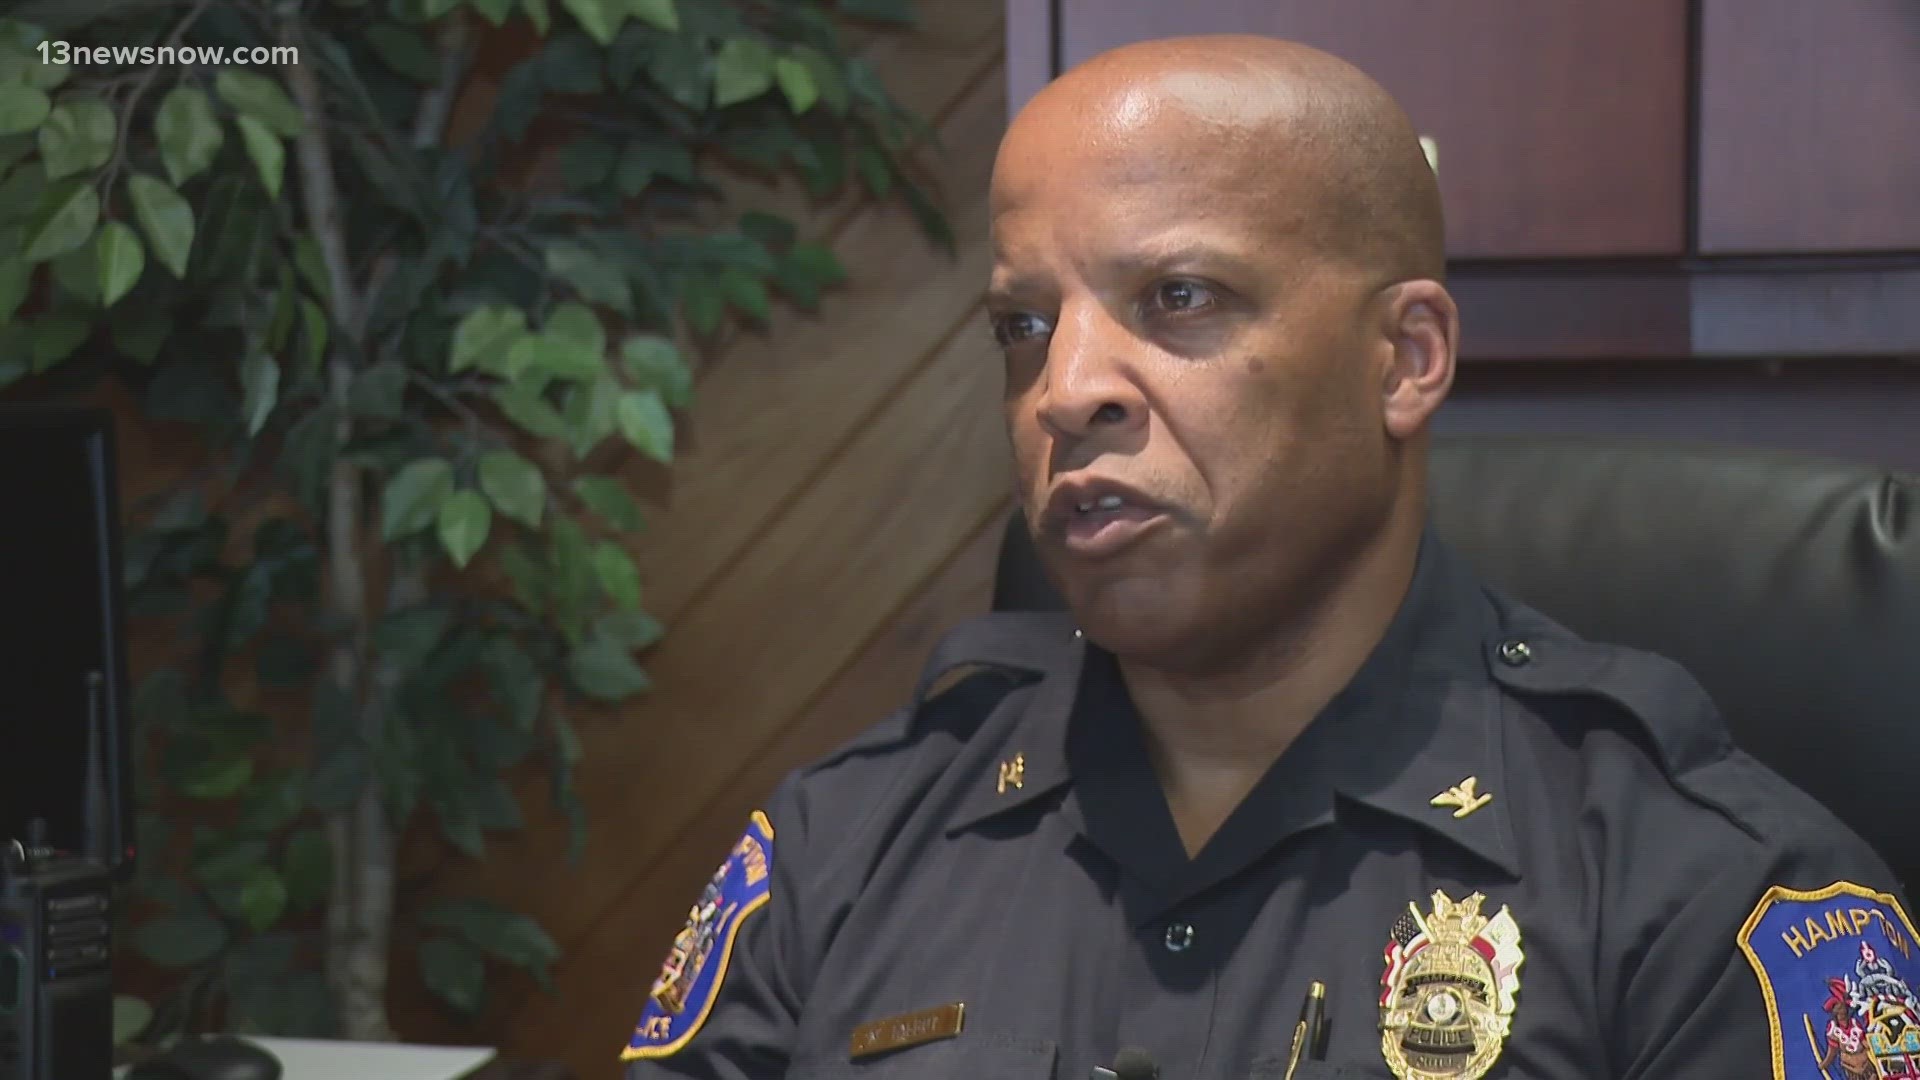 A source confirmed to 13News Now that Hampton Police Chief Mark Talbot will become Norfolk's next top cop.